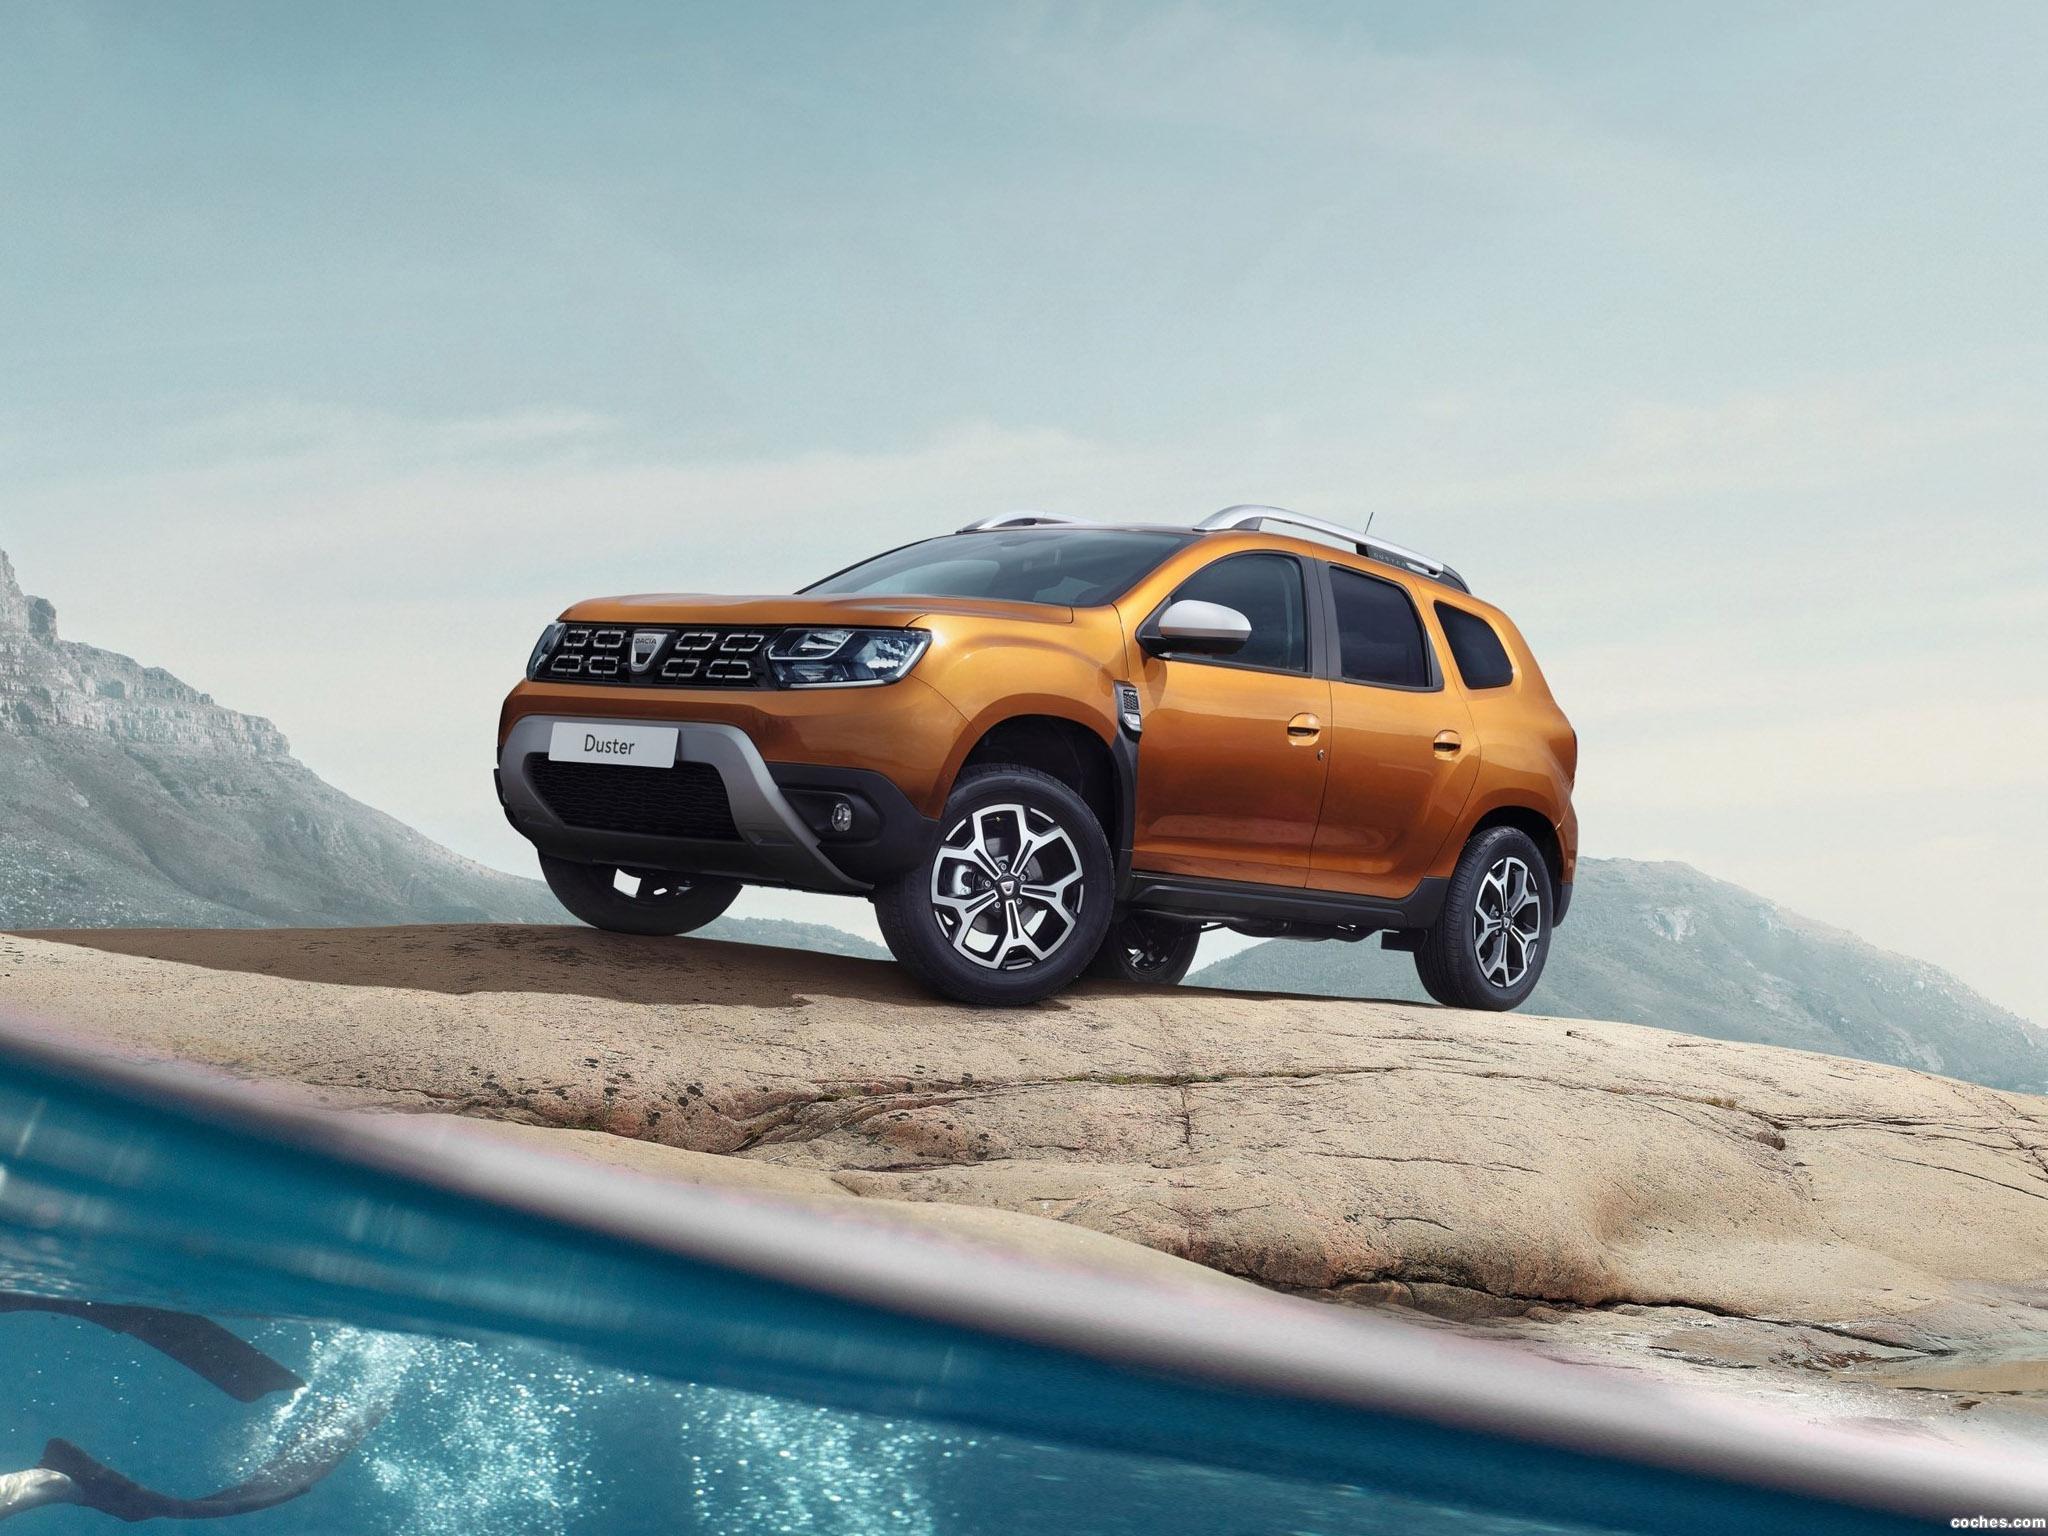 Рено дастер 2021 2.0. Duster 2018. Renault Duster 2018. Кроссовер Рено Дастер. Рено Дастер 2021.